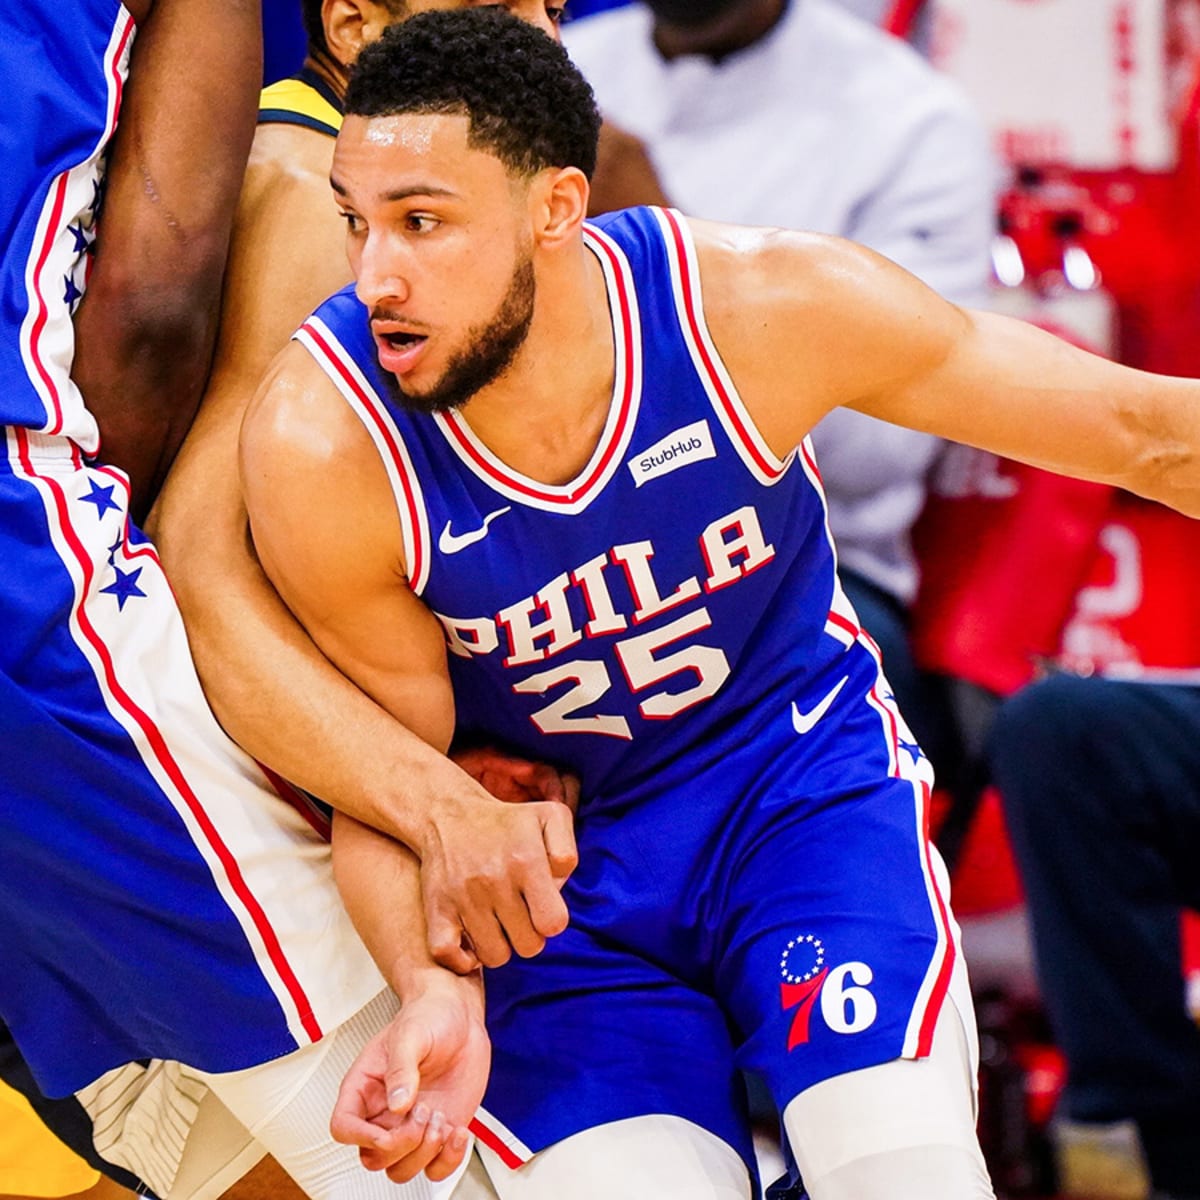 Inside the NBA: Ben Simmons plays against Philly next week